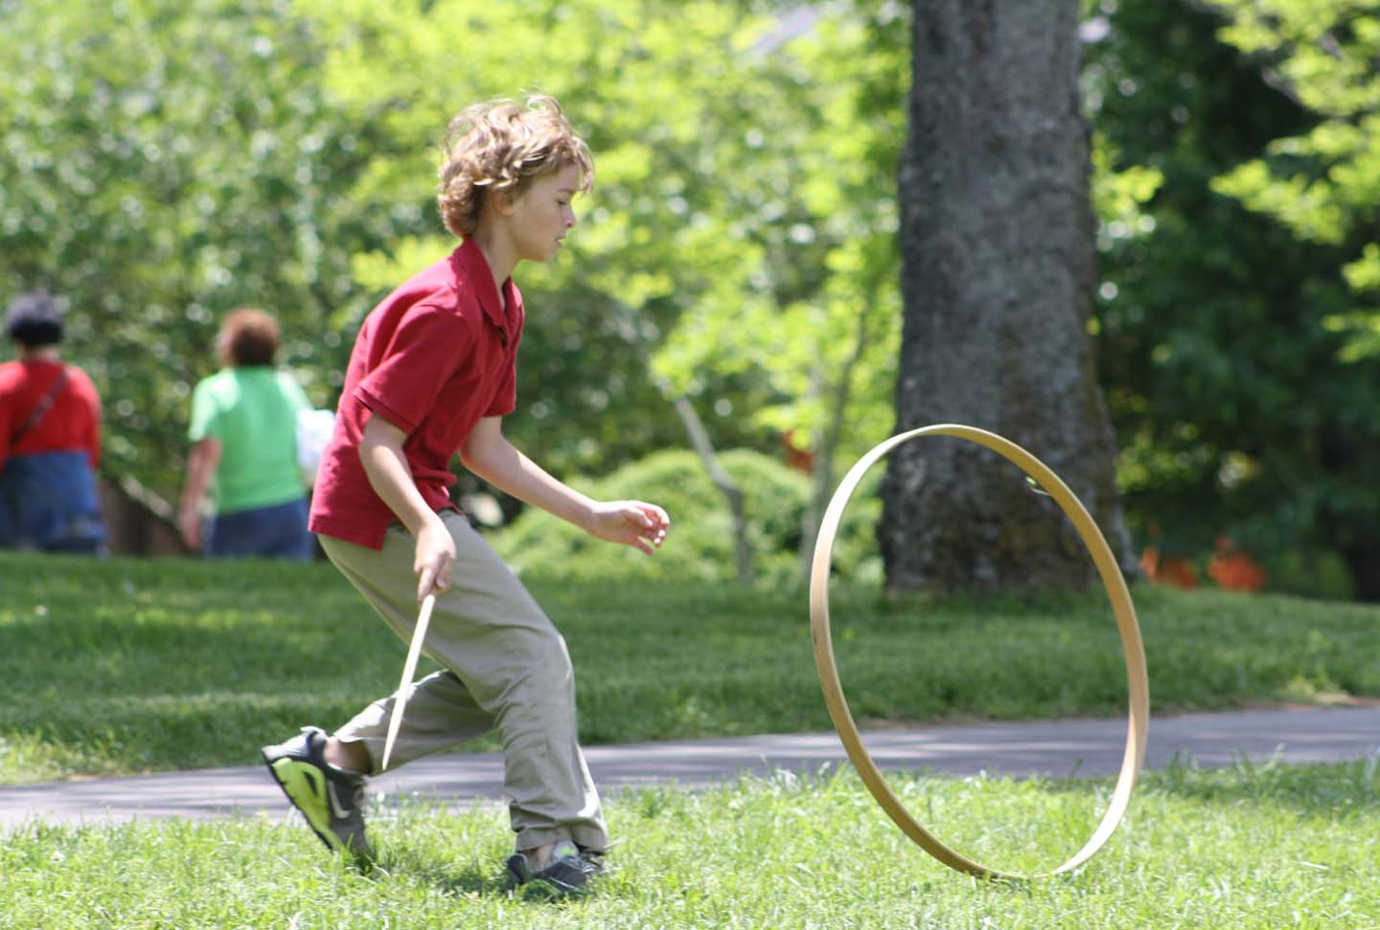 A visitor plays with a hoop, a common nineteenth-century children's game, on the grounds at Andrew Jackson's Hermitage. Image courtesy of The Hermitage.